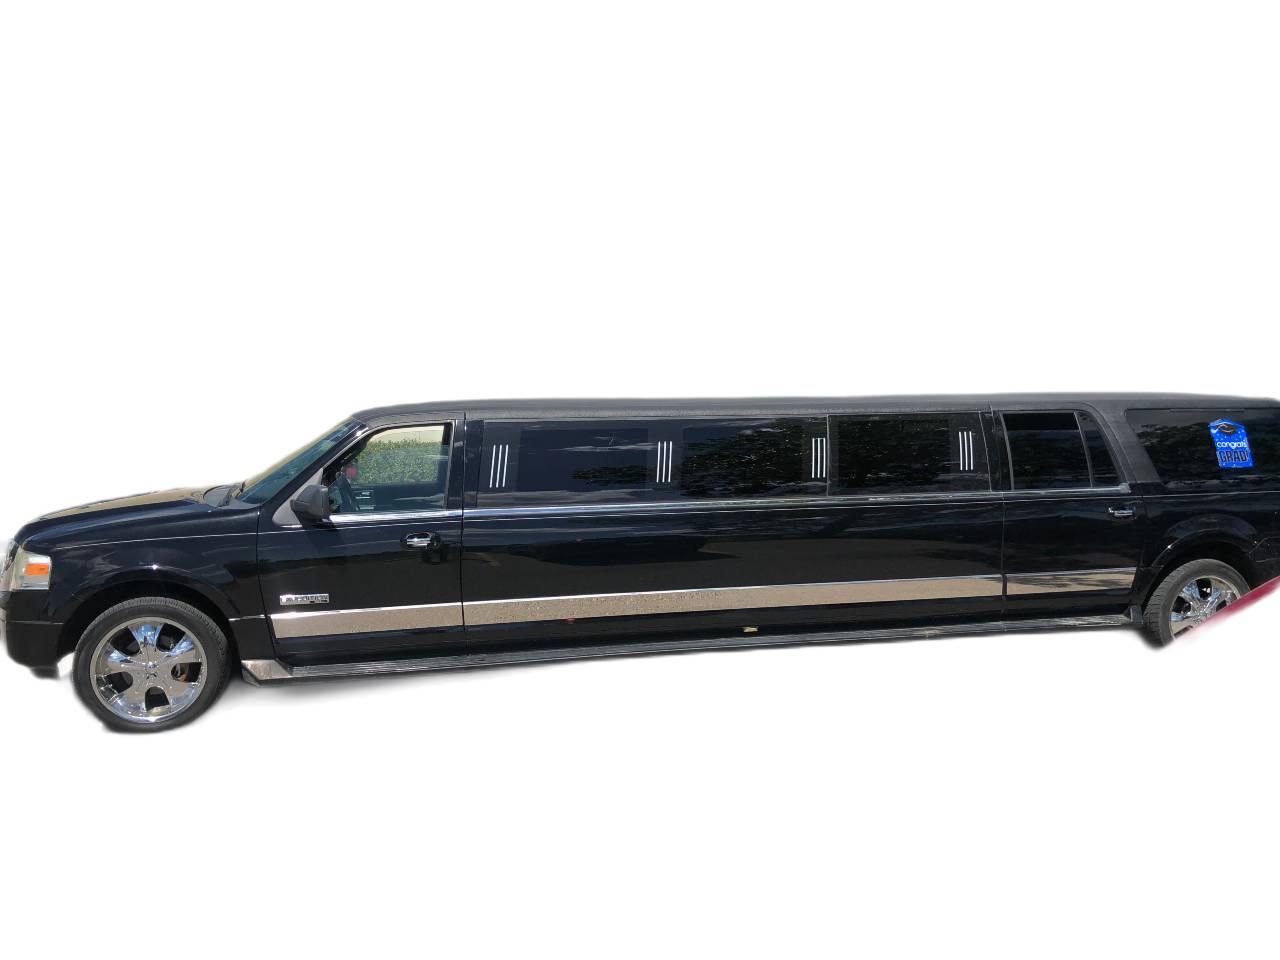 A-1 Limo Calgary Beautiful Luxury SUV Black Expedition Stretch Limo